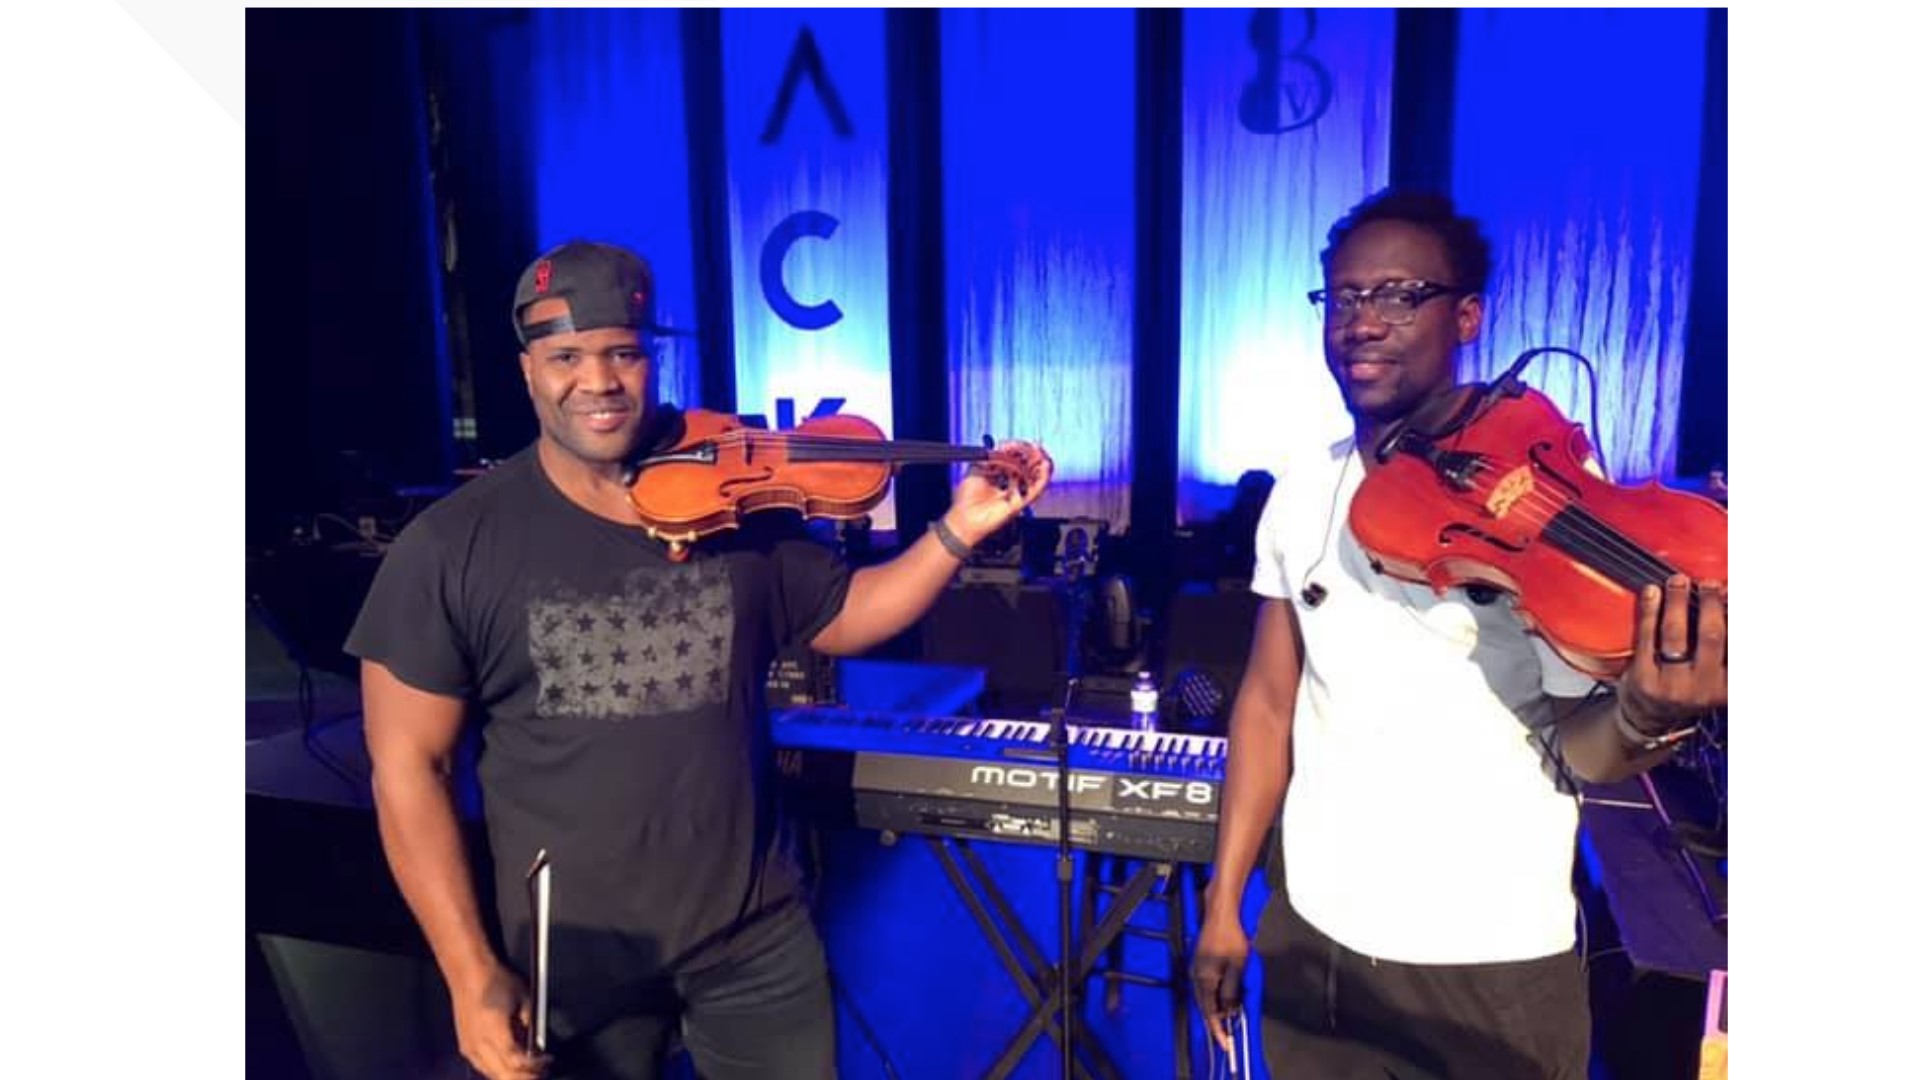 Black Violin is the blend of classical, hip-hop, rock, R&B, and bluegrass music. They will perform at the BIjou Theatre at 8pm on Aug. 7. They have performed with some big names in music and continue to inspire young people to find their passion in music. Visit blackviolin.net to learn more.